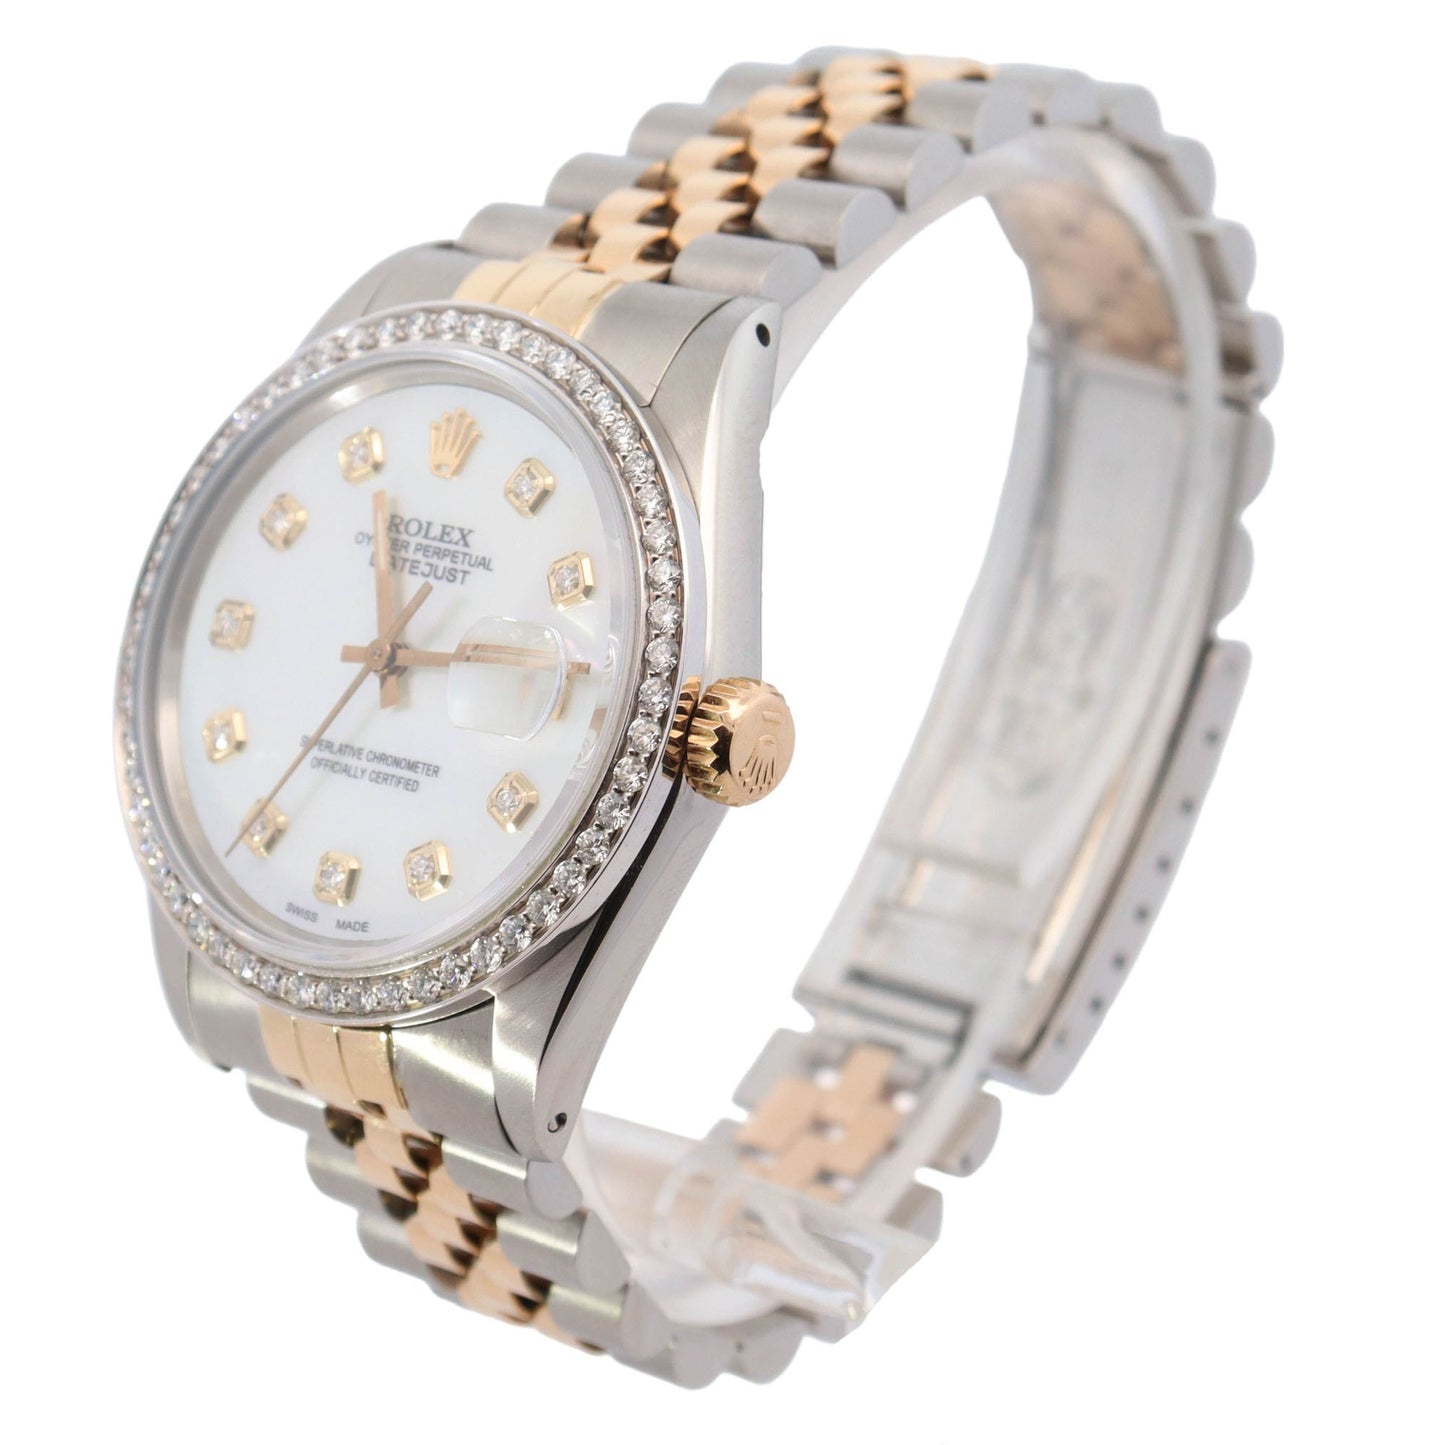 Rolex Datejust Yellow Gold & Stainless 36mm Custom White MOP Diamond Dial Watch Reference# 16013